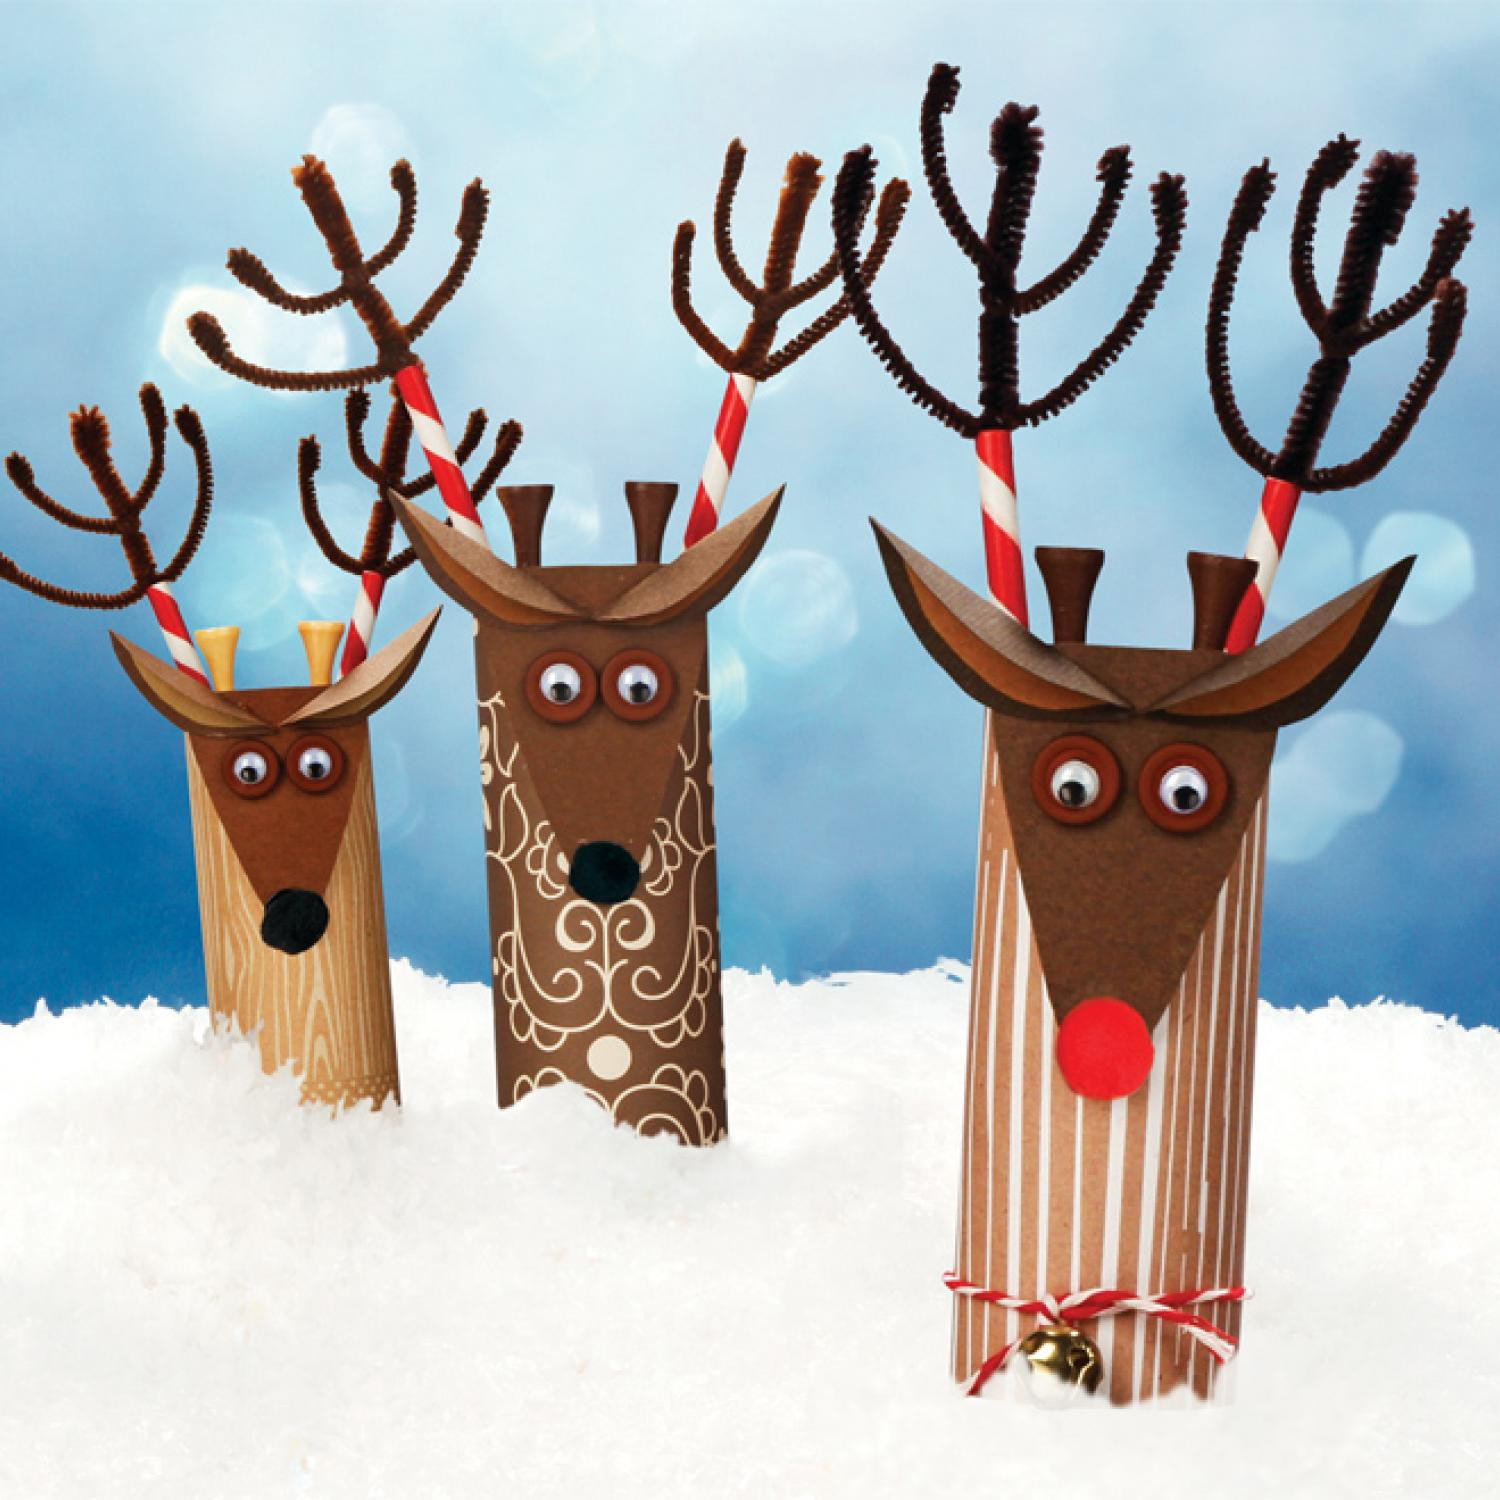 Arts And Craft Christmas Ideas
 Easy Christmas Crafts and Activities for Kids